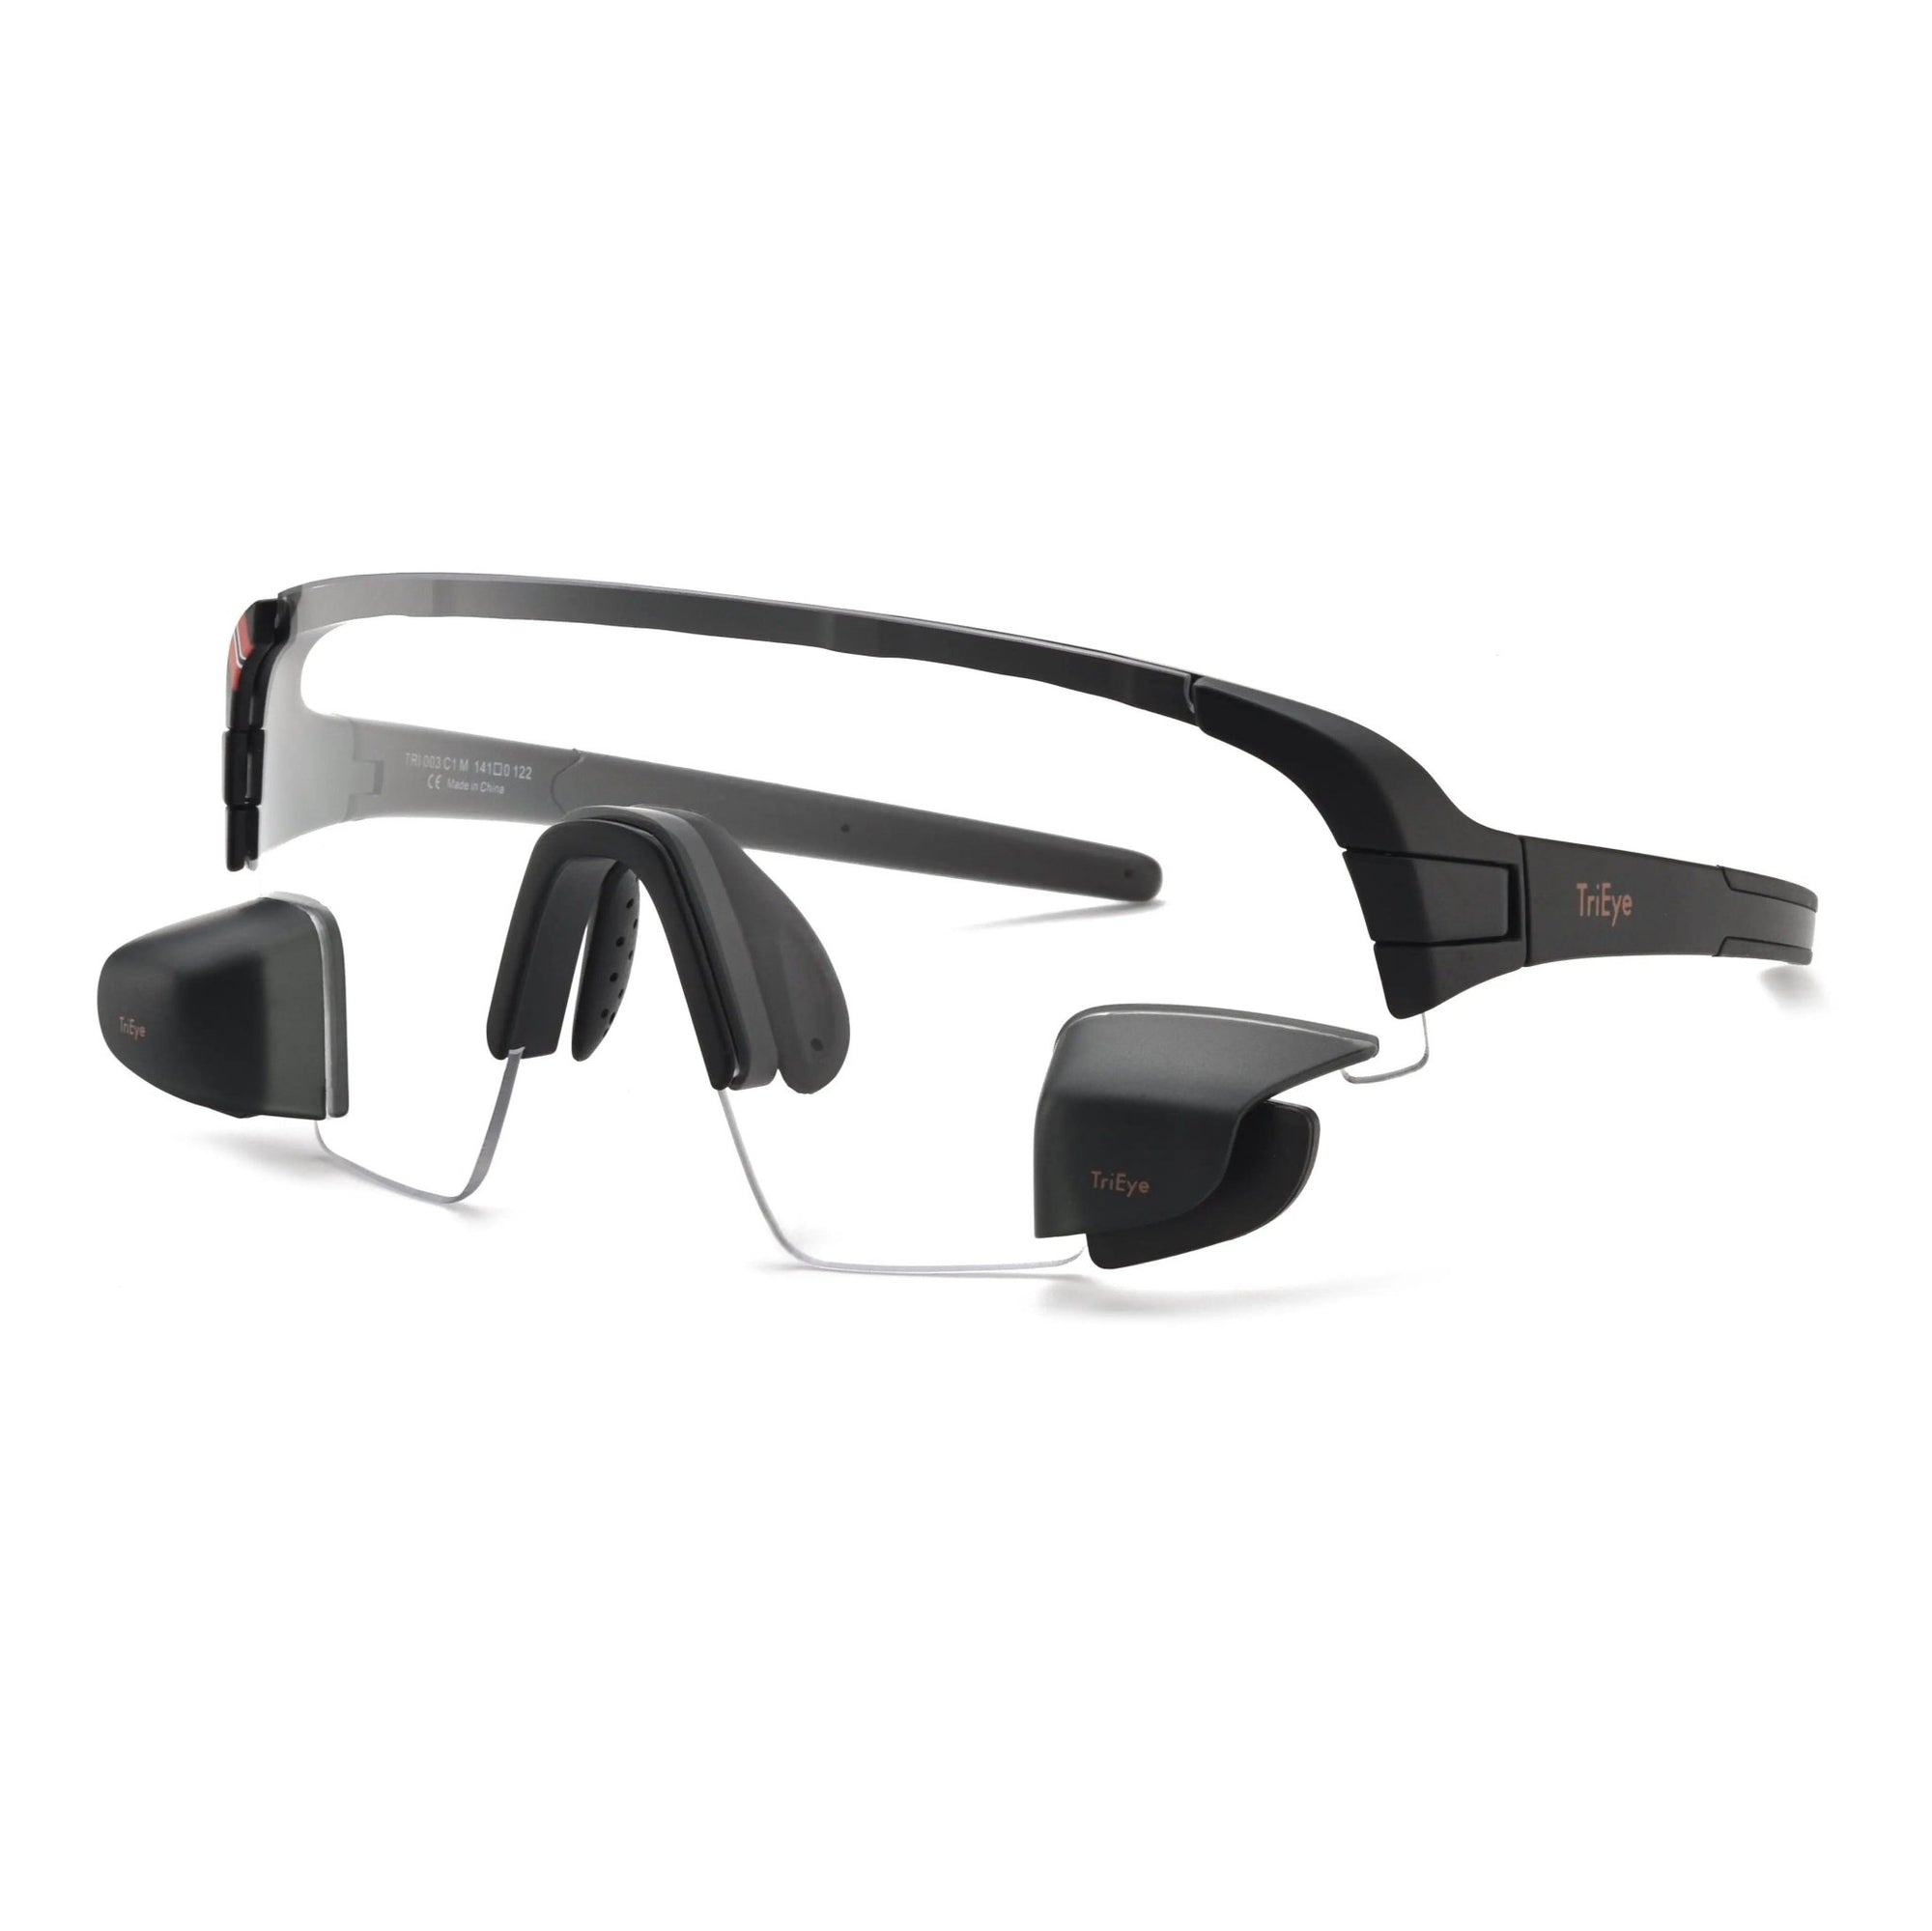 View Sport Dual Standard - Mirror Glasses for Rowing - TriEye